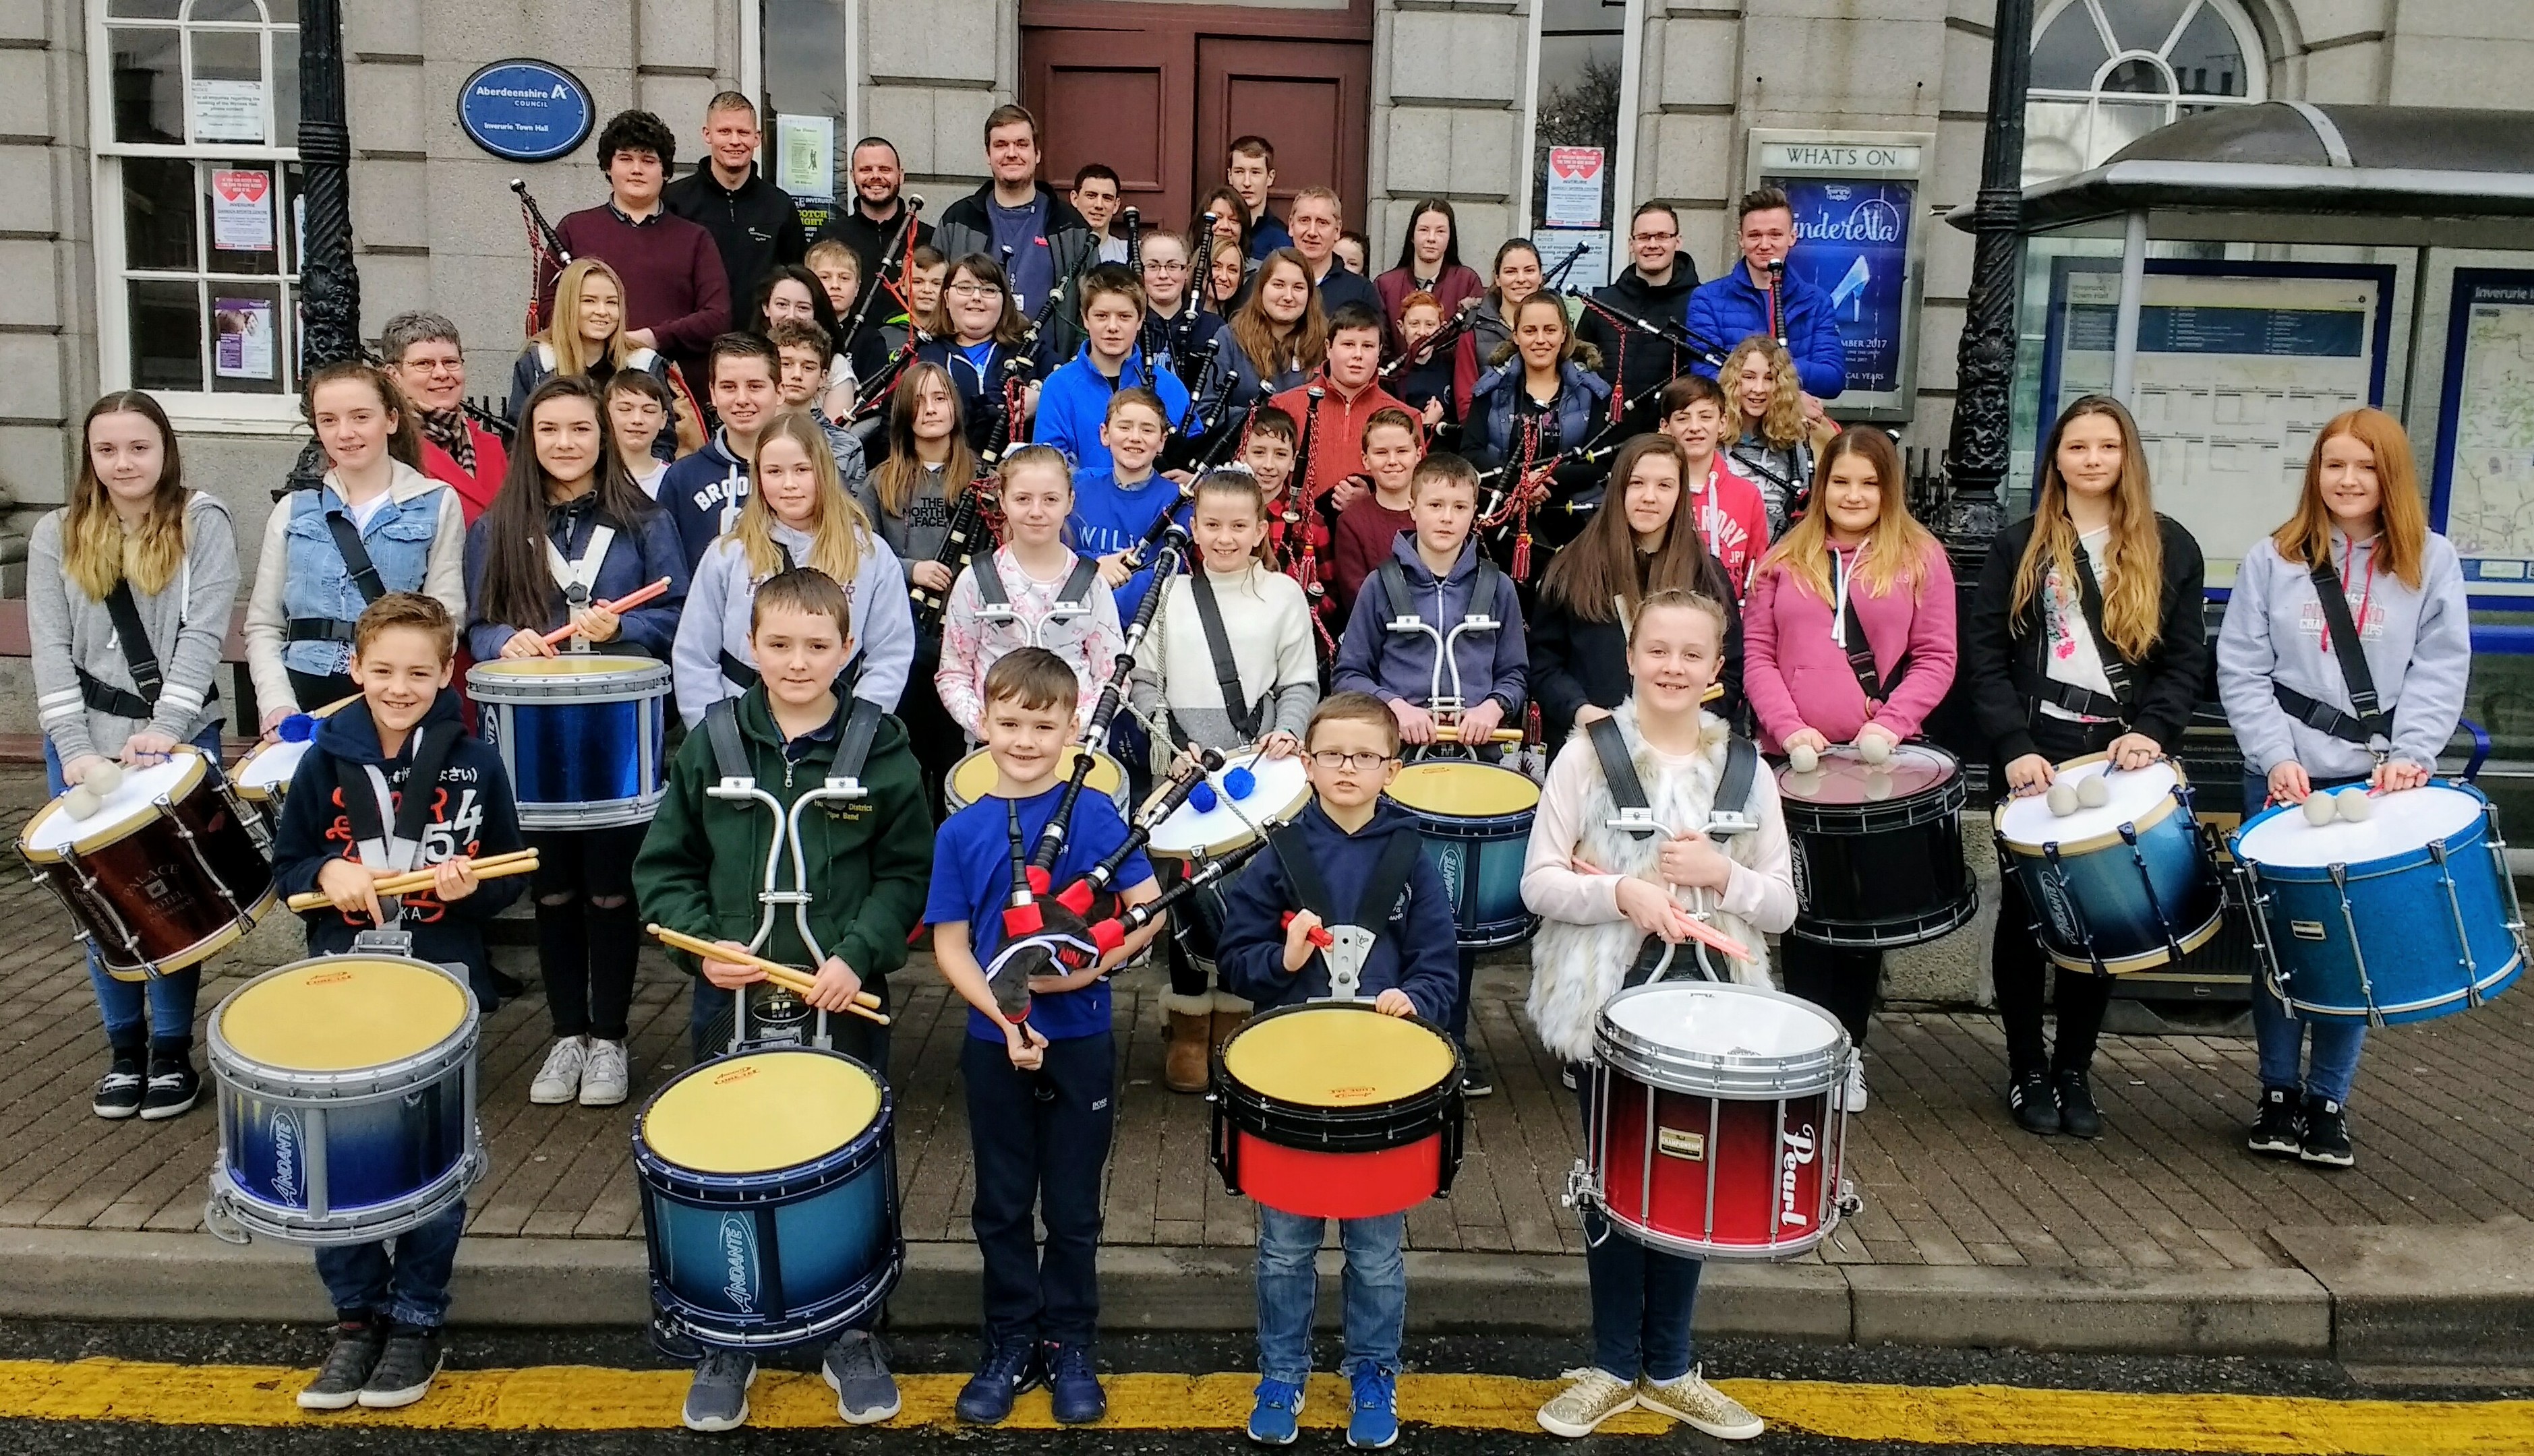 A total of 38 young pipers and drummers attended the “kick start” rehearsal day of the Aberdeenshire Schools Pipe Band at Inverurie Town Hall yesterday.